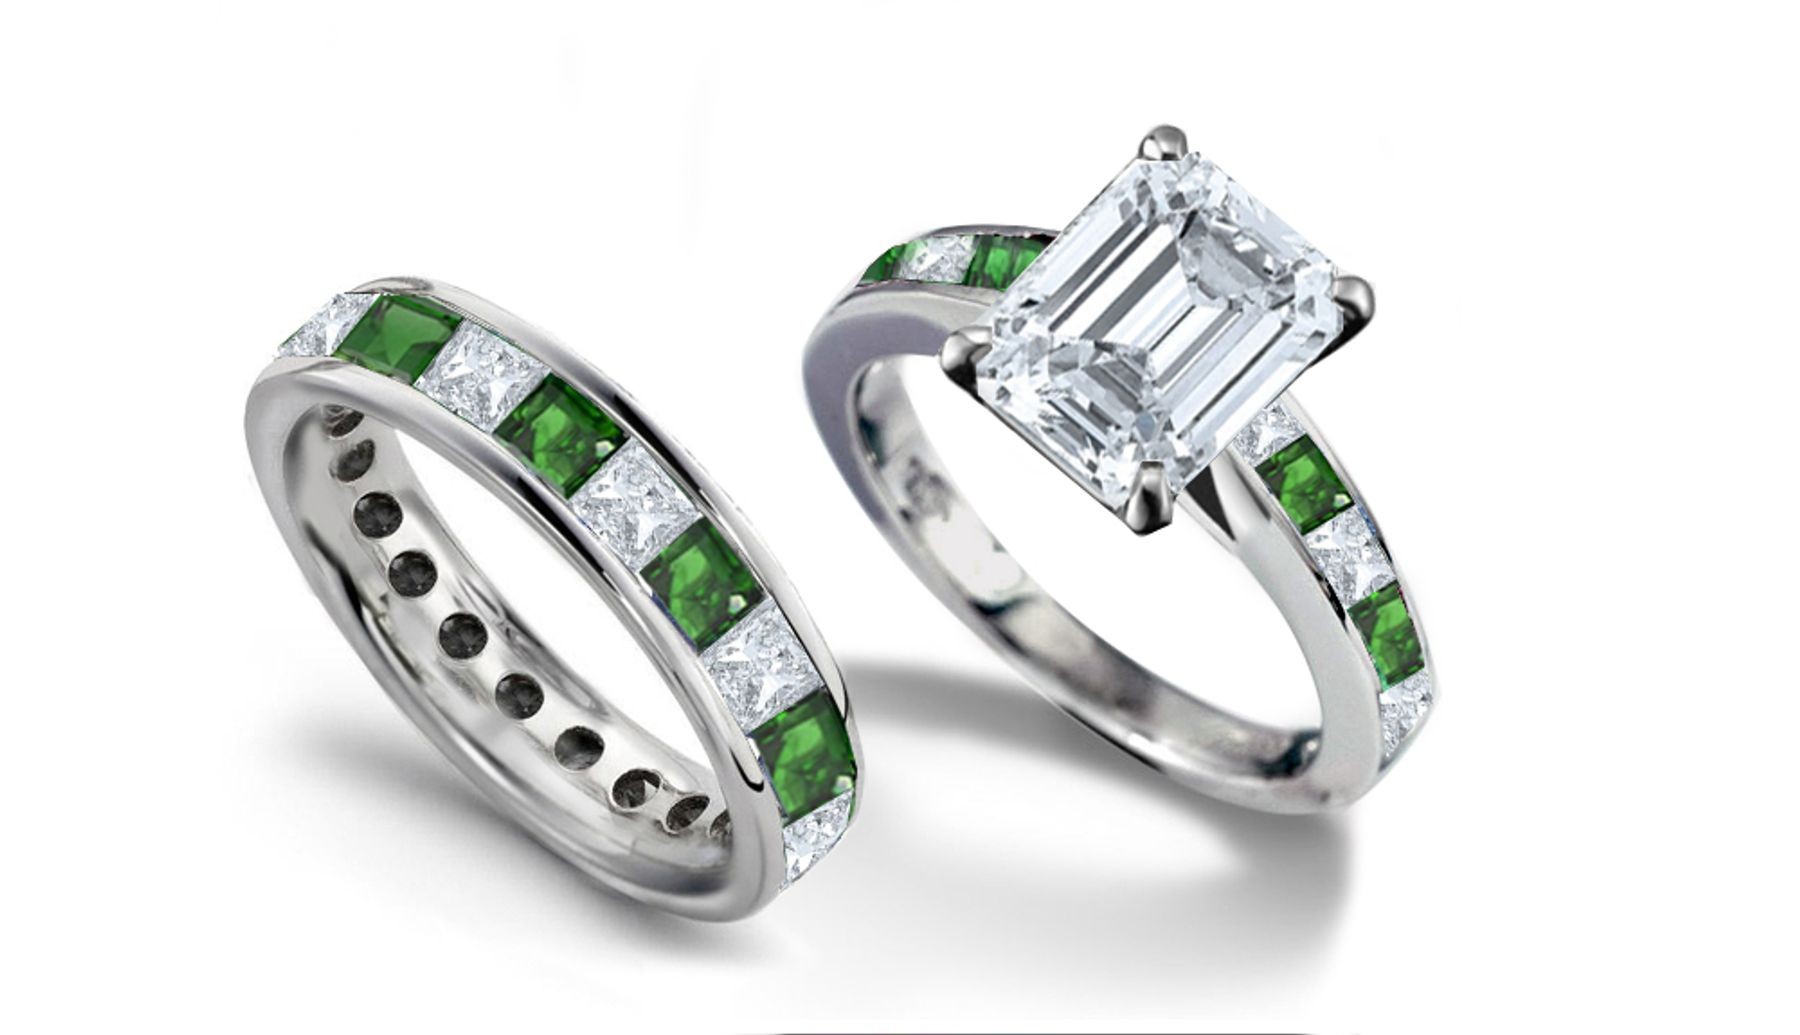 Highly Prized Emeralds: 14k Gold Ring Features Emerald Cut Diamonds & Princess Cut Emeralds and Diamond Band